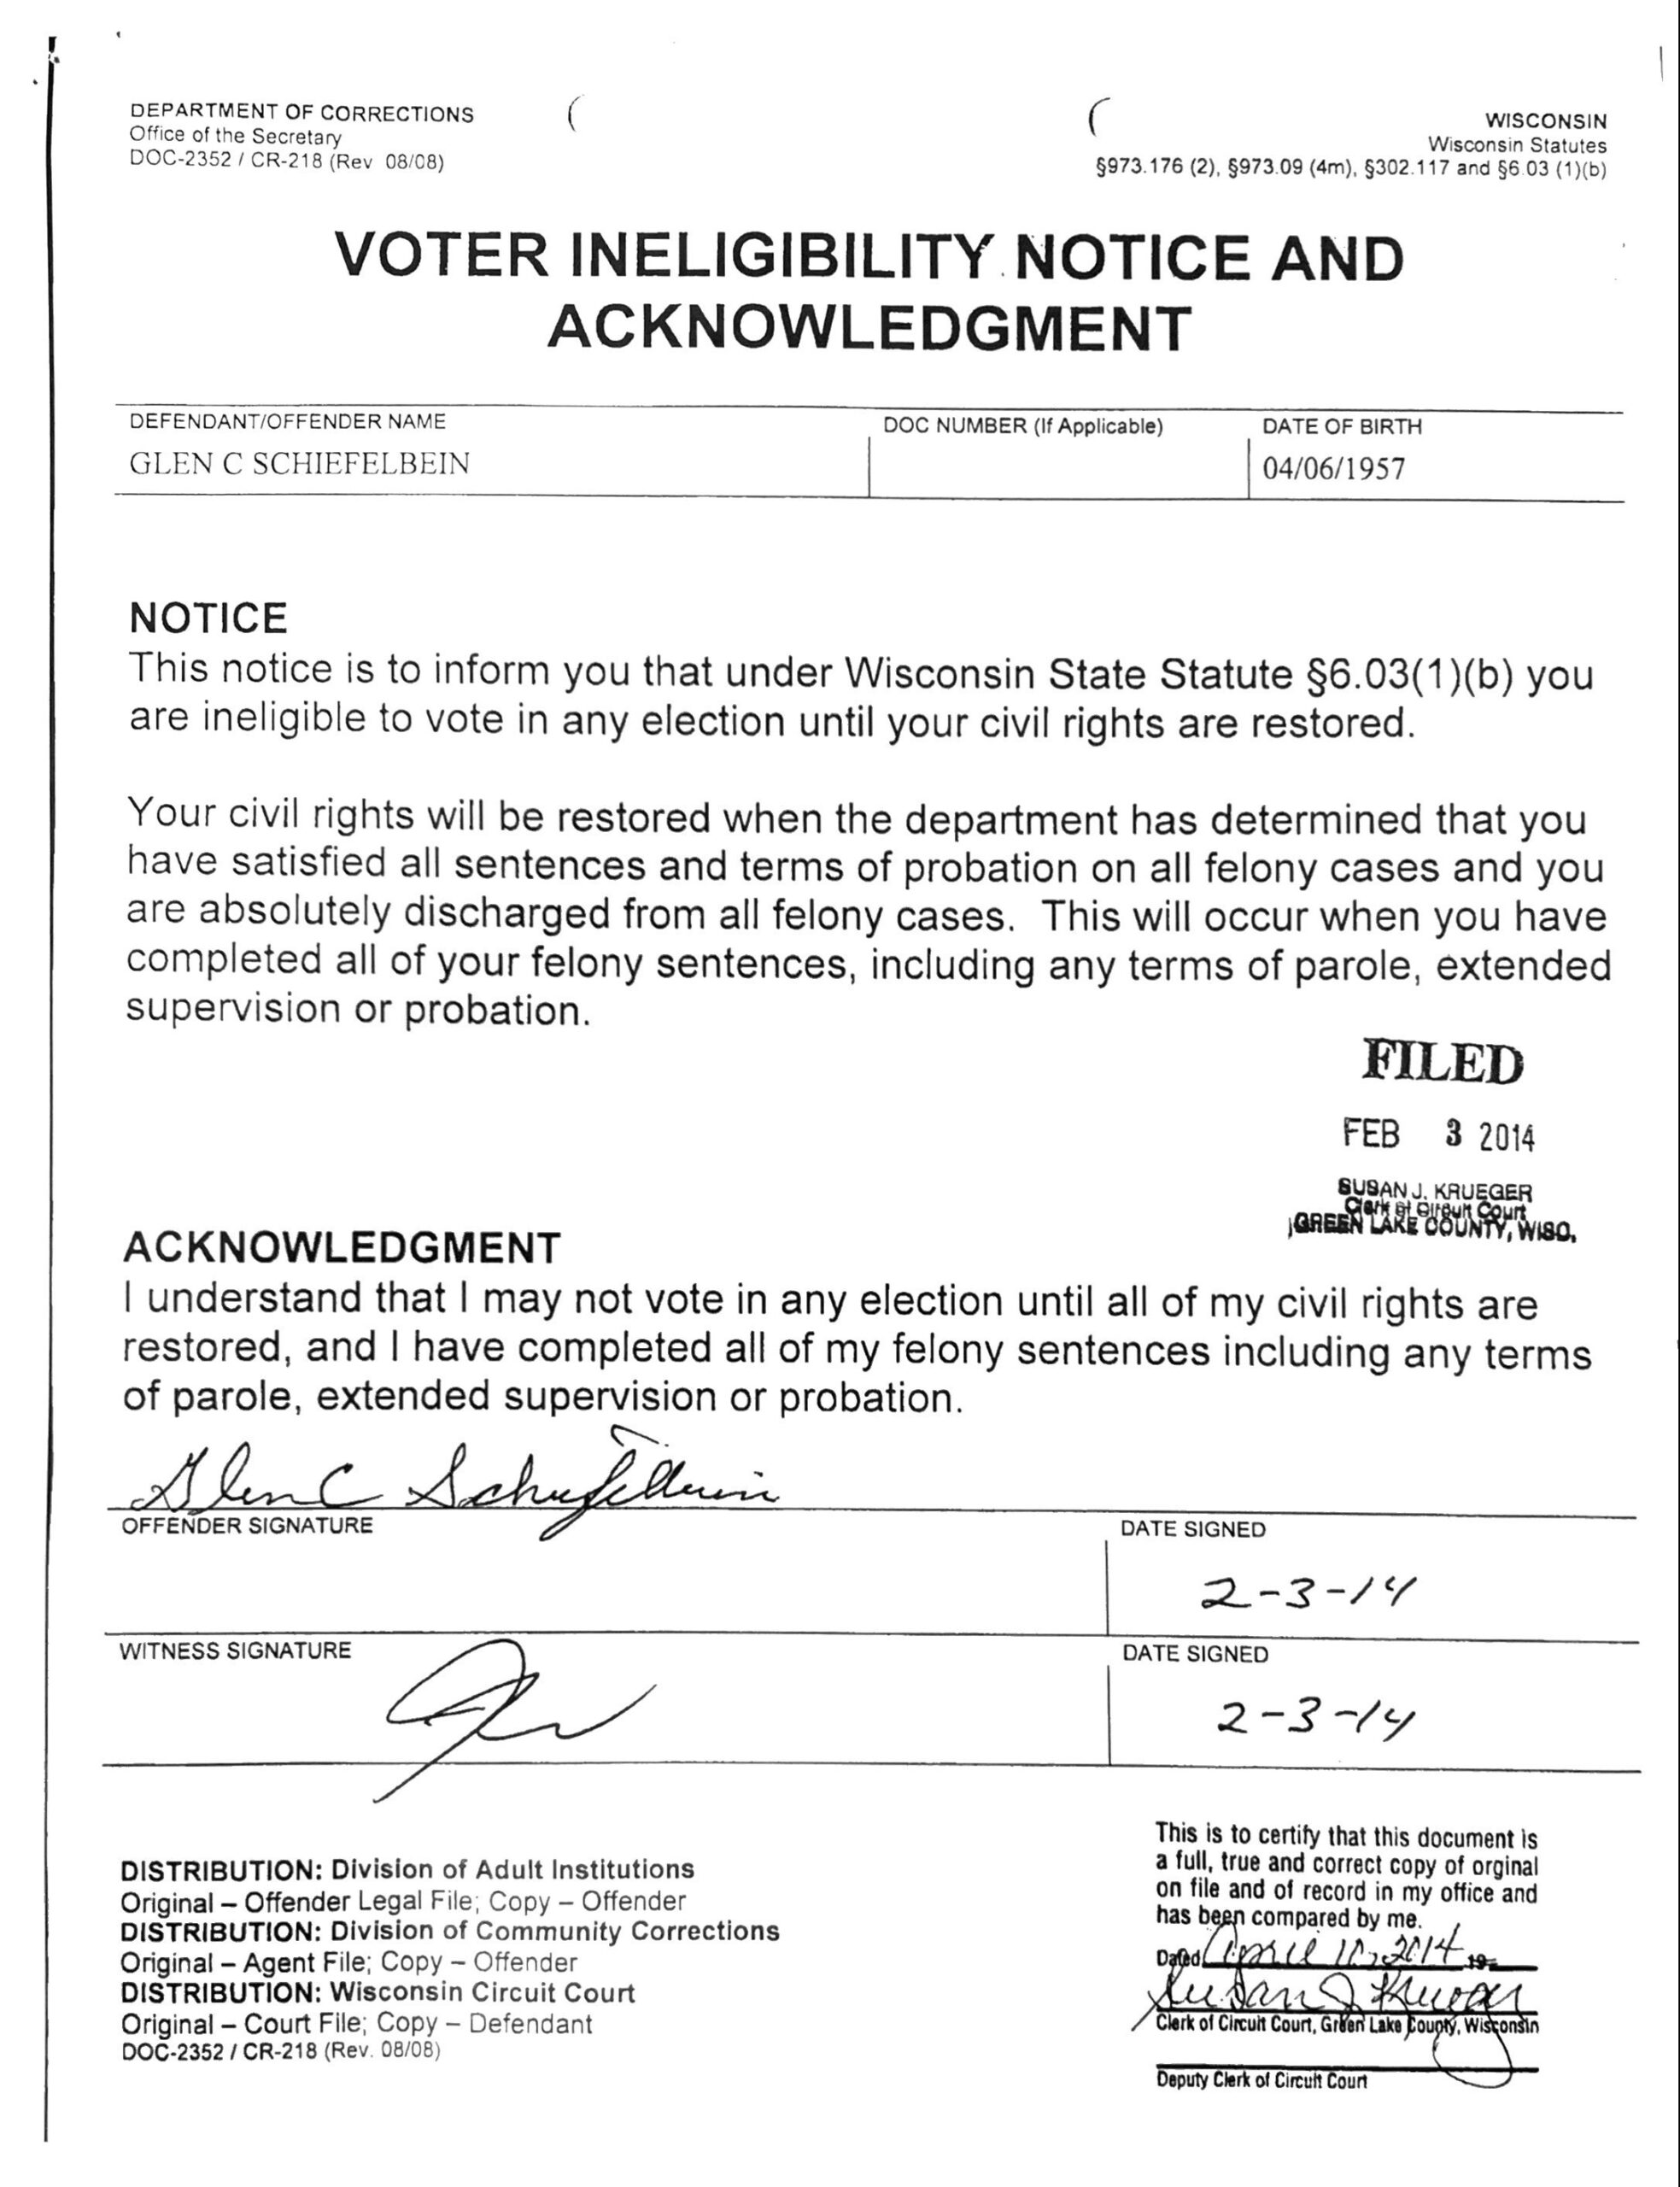 A scan of a form from the Wisconsin Department of Corrections with the title "Voter Ineligibility Notice and Acknowledgement" serves as an official notice to a convicted felon that they may not vote in any election.